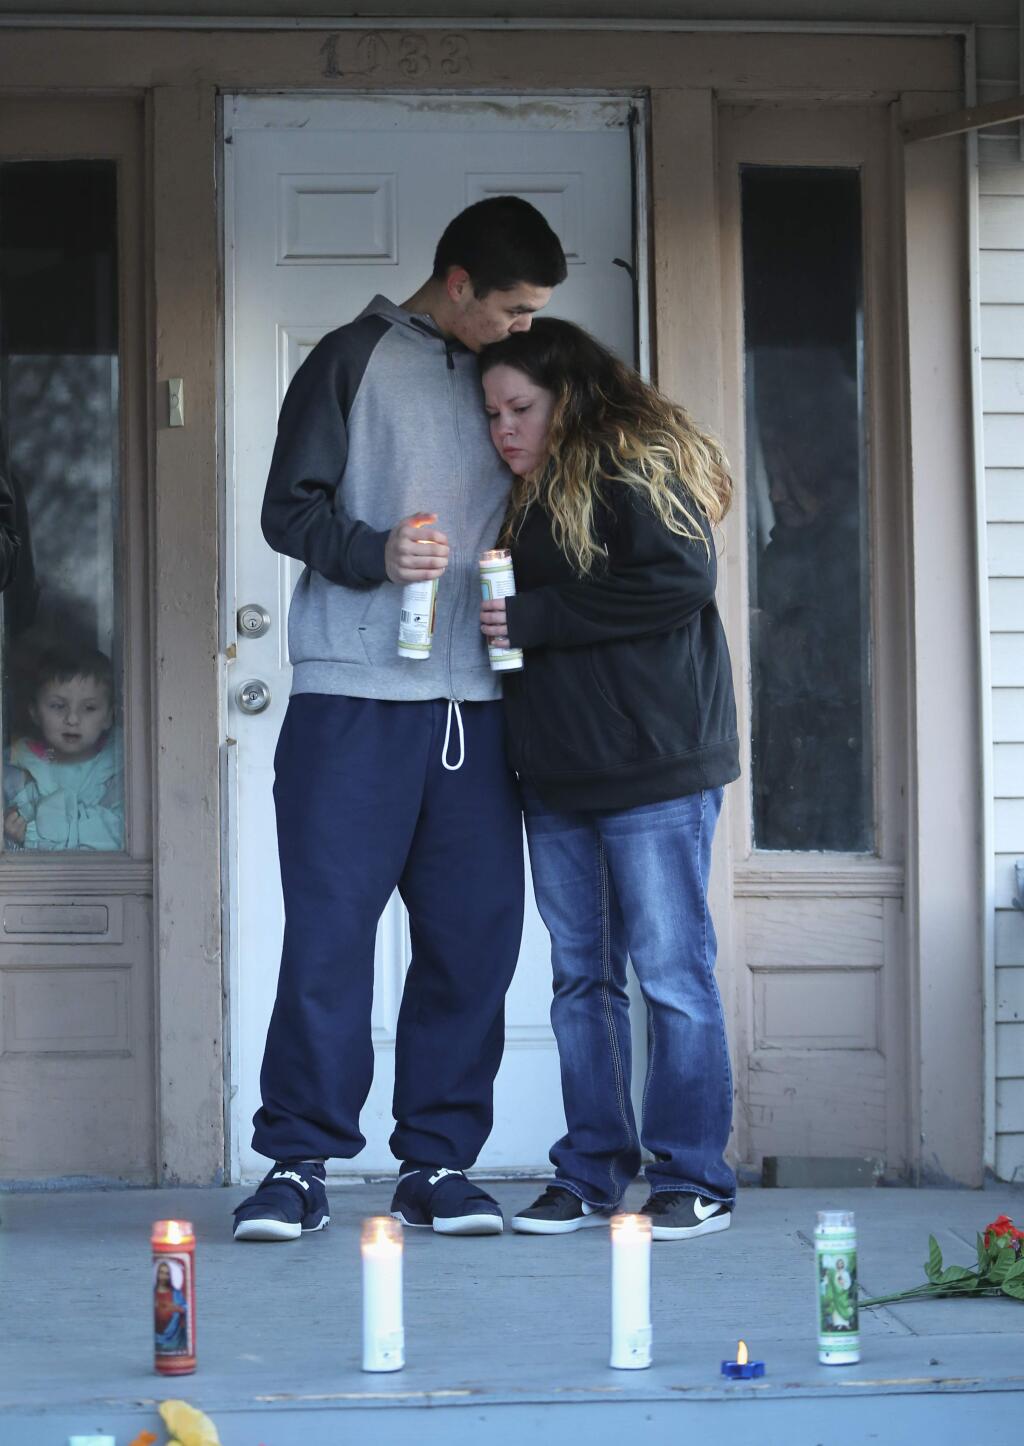 Francis Finch, left, and Tawny Unruh stand quietly on the very spot where Andrew Finch was shot and killed by Wichita Police on Thursday night. Finch was shot by police when a false report of a murder and hostage situation at Finch's address was called into police by an individual performing a prank known as 'swatting.' Francis Finch is Andrew Finch's nephew and Tawny Unruh is the mother of Finch's two children. A candlelight vigil was held at Finch's home of Saturday, Dec. 30, 2017. (Travis Heying/The Wichita Eagle via AP)